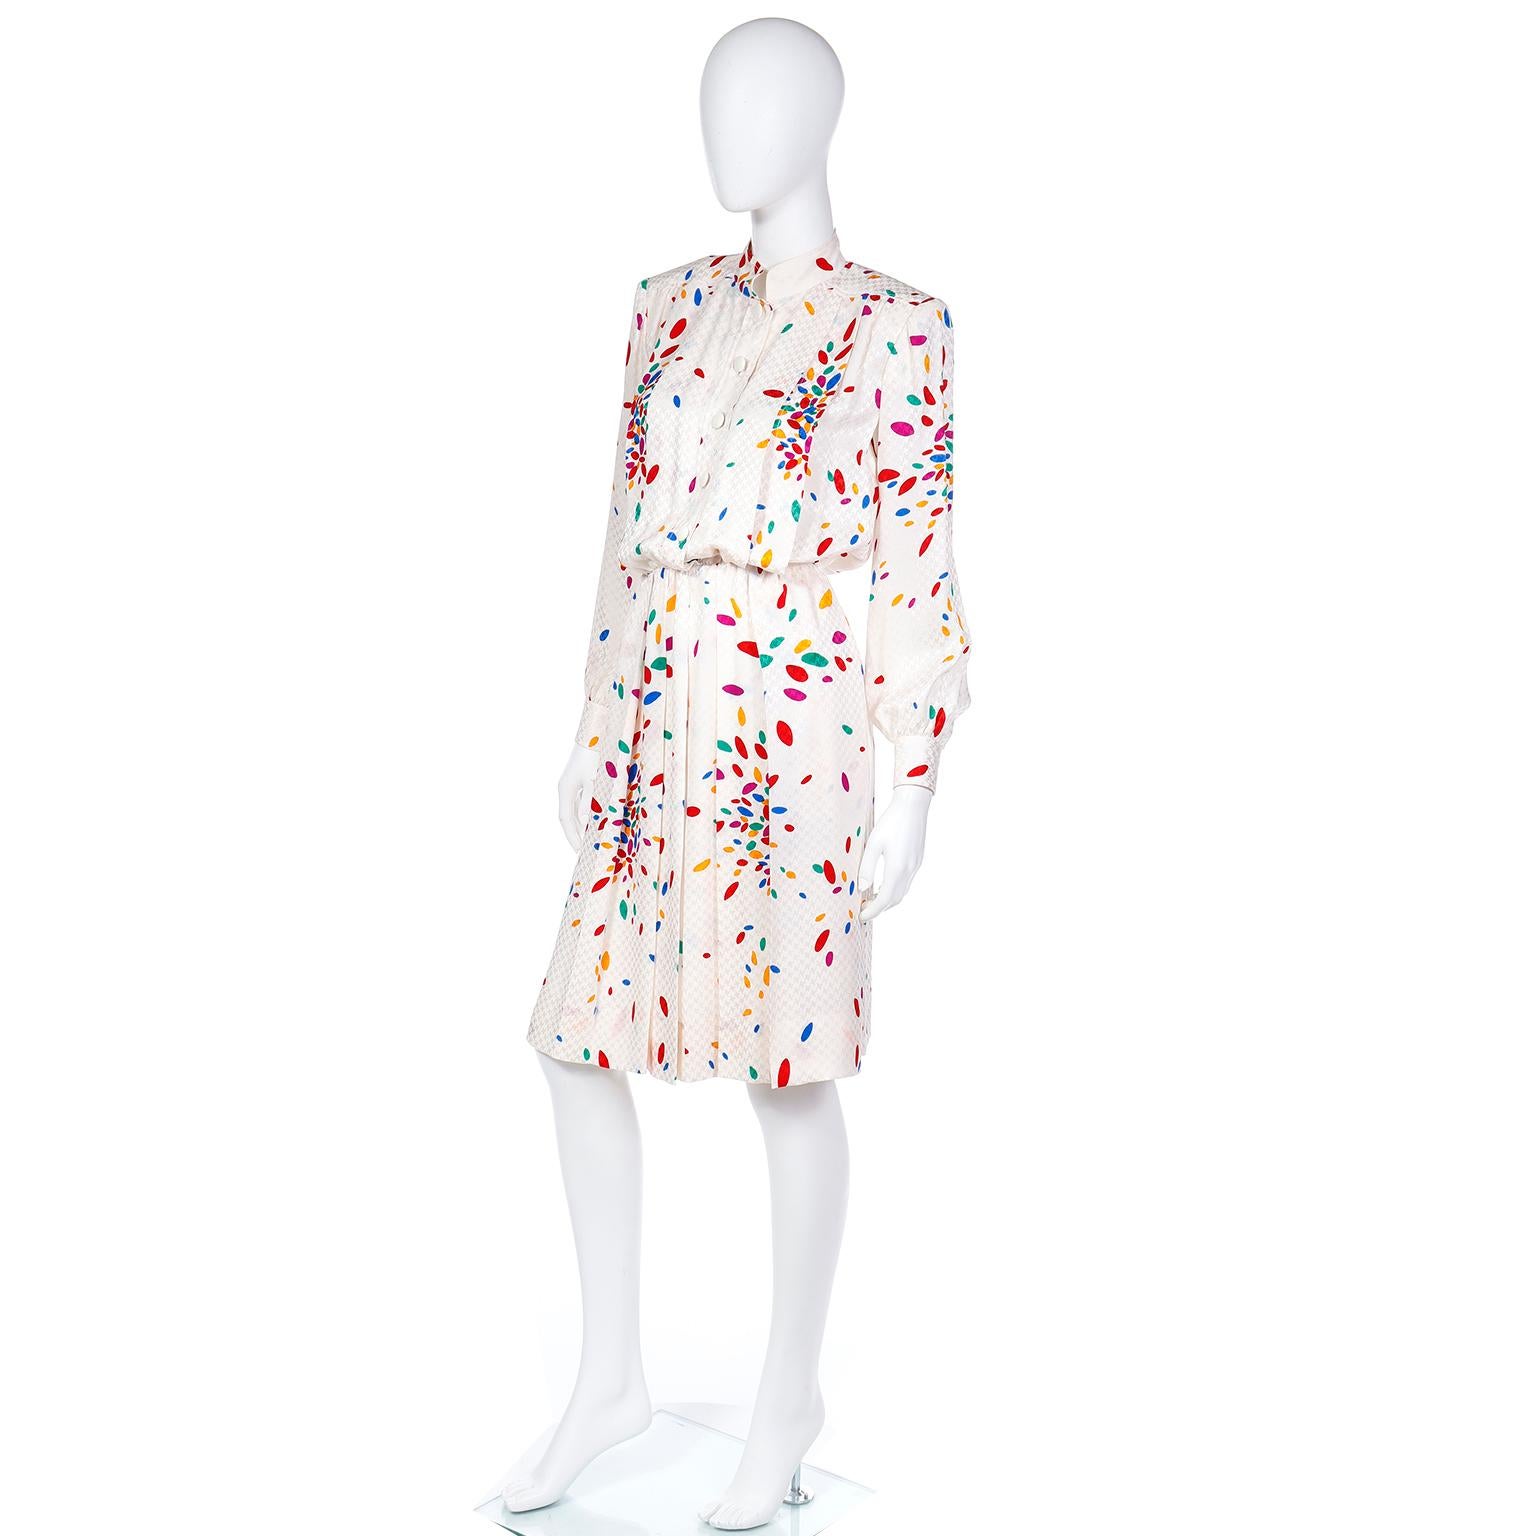 Yves Saint laurent Tonal White Print Silk Dress w Colorful Ovals & Polka Dots In Excellent Condition For Sale In Portland, OR